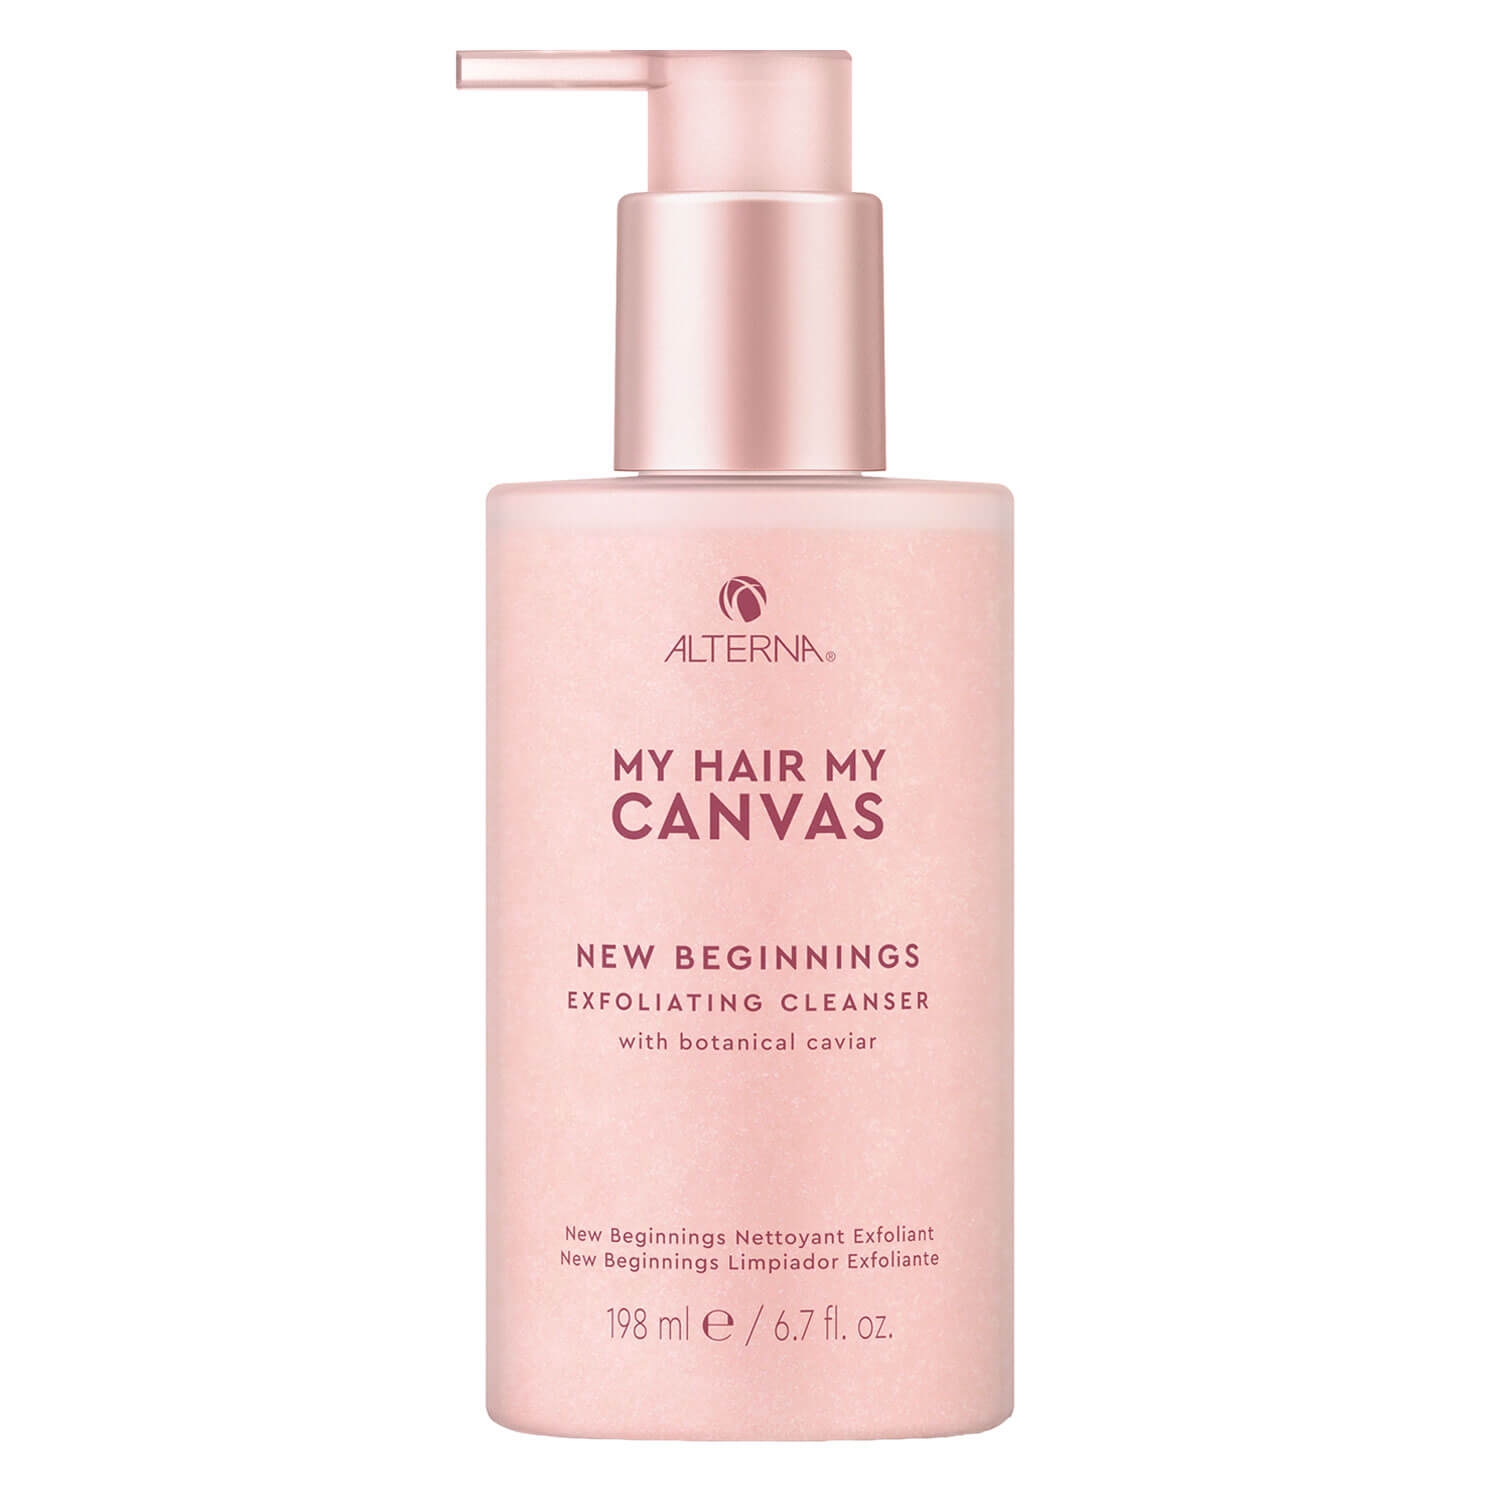 Product image from My Hair My Canvas - New Beginnings Exfoliating Cleanser